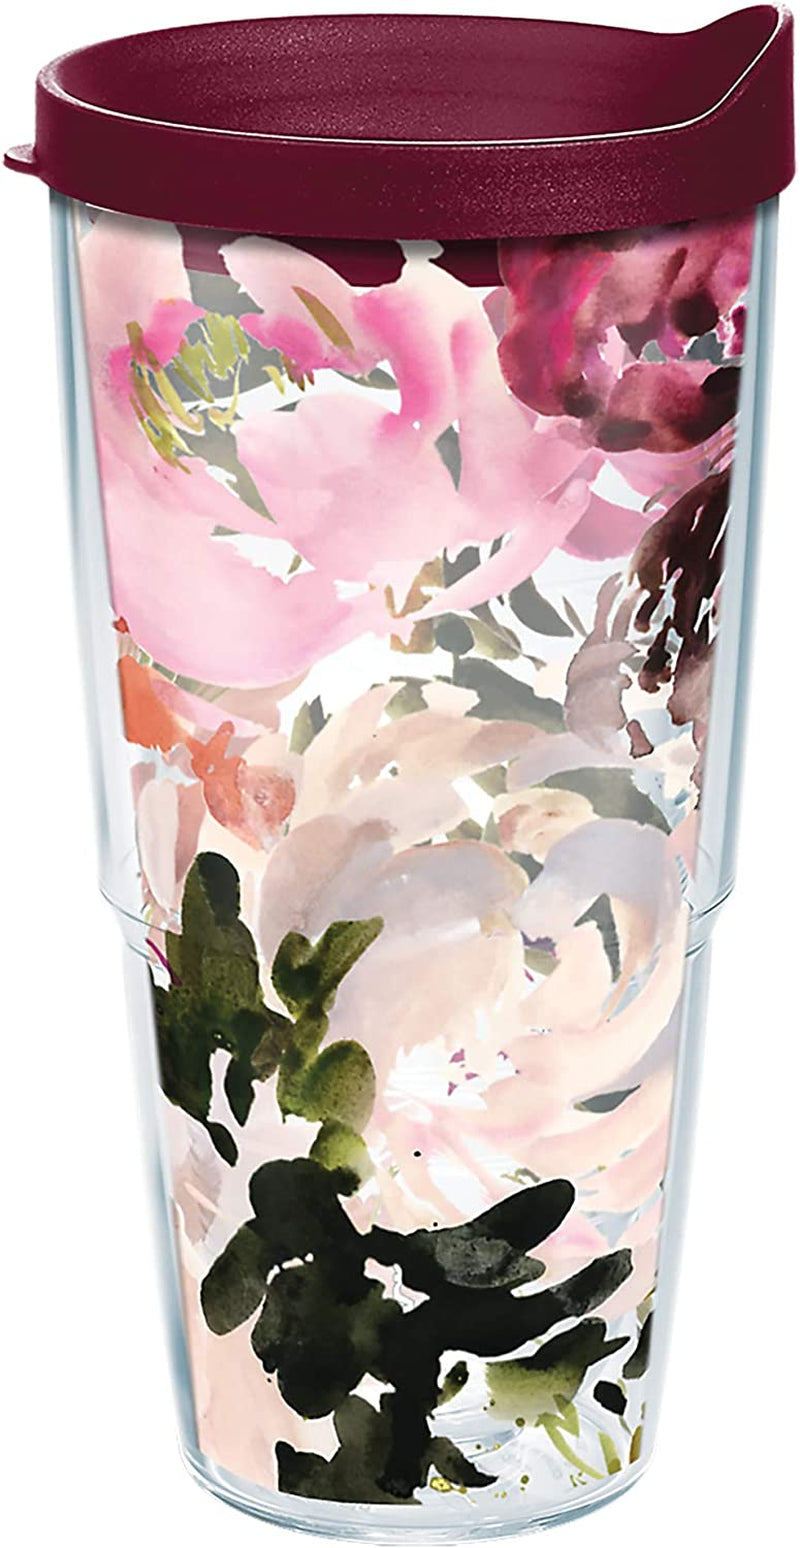 Tervis Made in USA Double Walled Kelly Ventura Floral Collection Insulated Tumbler Cup Keeps Drinks Cold & Hot, 16Oz 4Pk - Classic, Assorted Home & Garden > Kitchen & Dining > Tableware > Drinkware Tervis Posy 24oz - Classic 